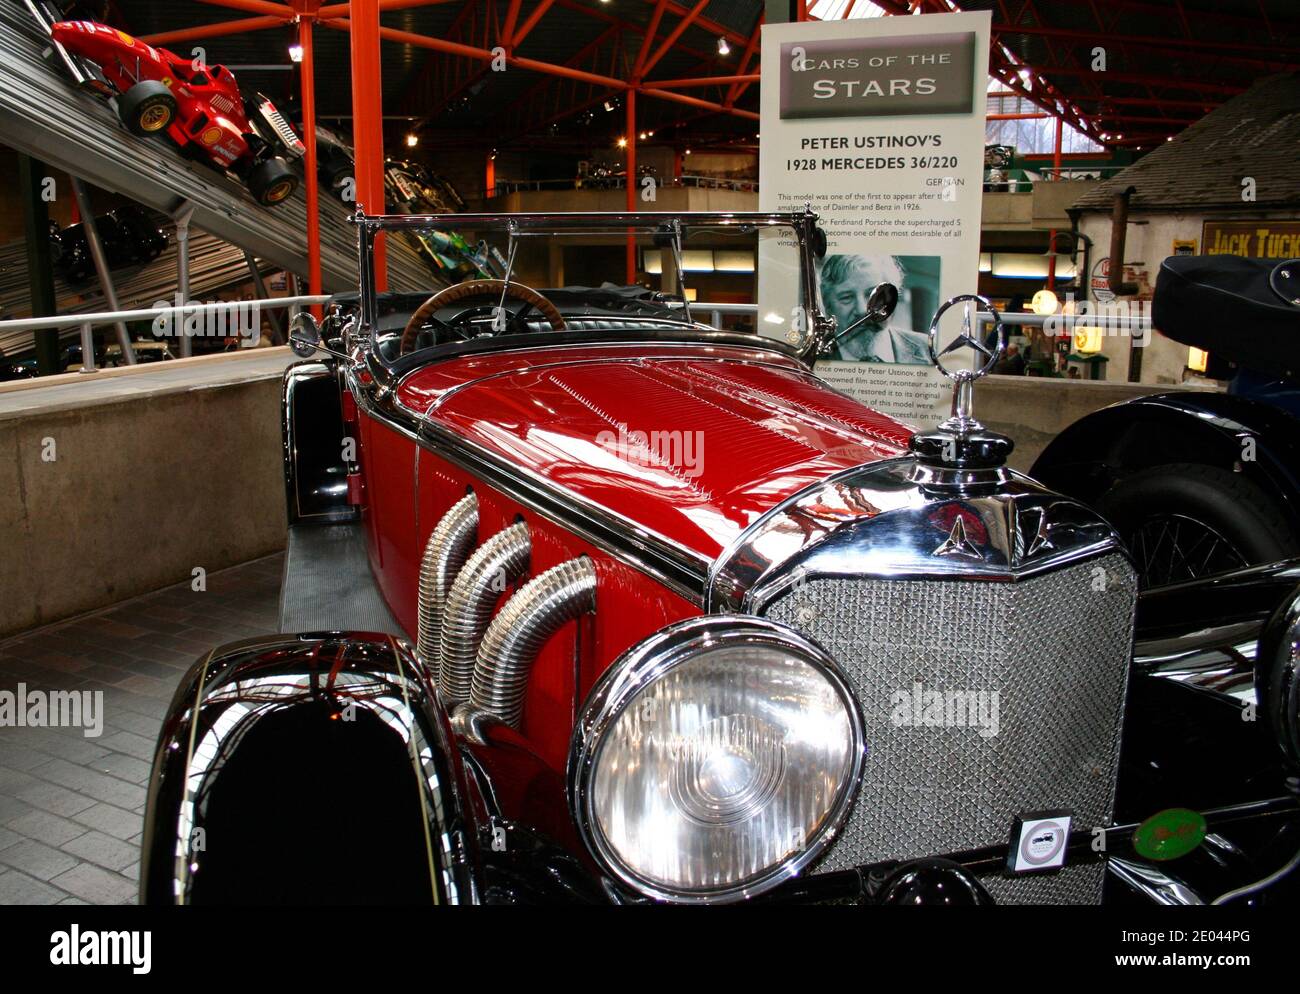 Peter Ustinov's 1928 Mercedes 36/220 car on display at the National Motor Museum Hampshire England UK Stock Photo